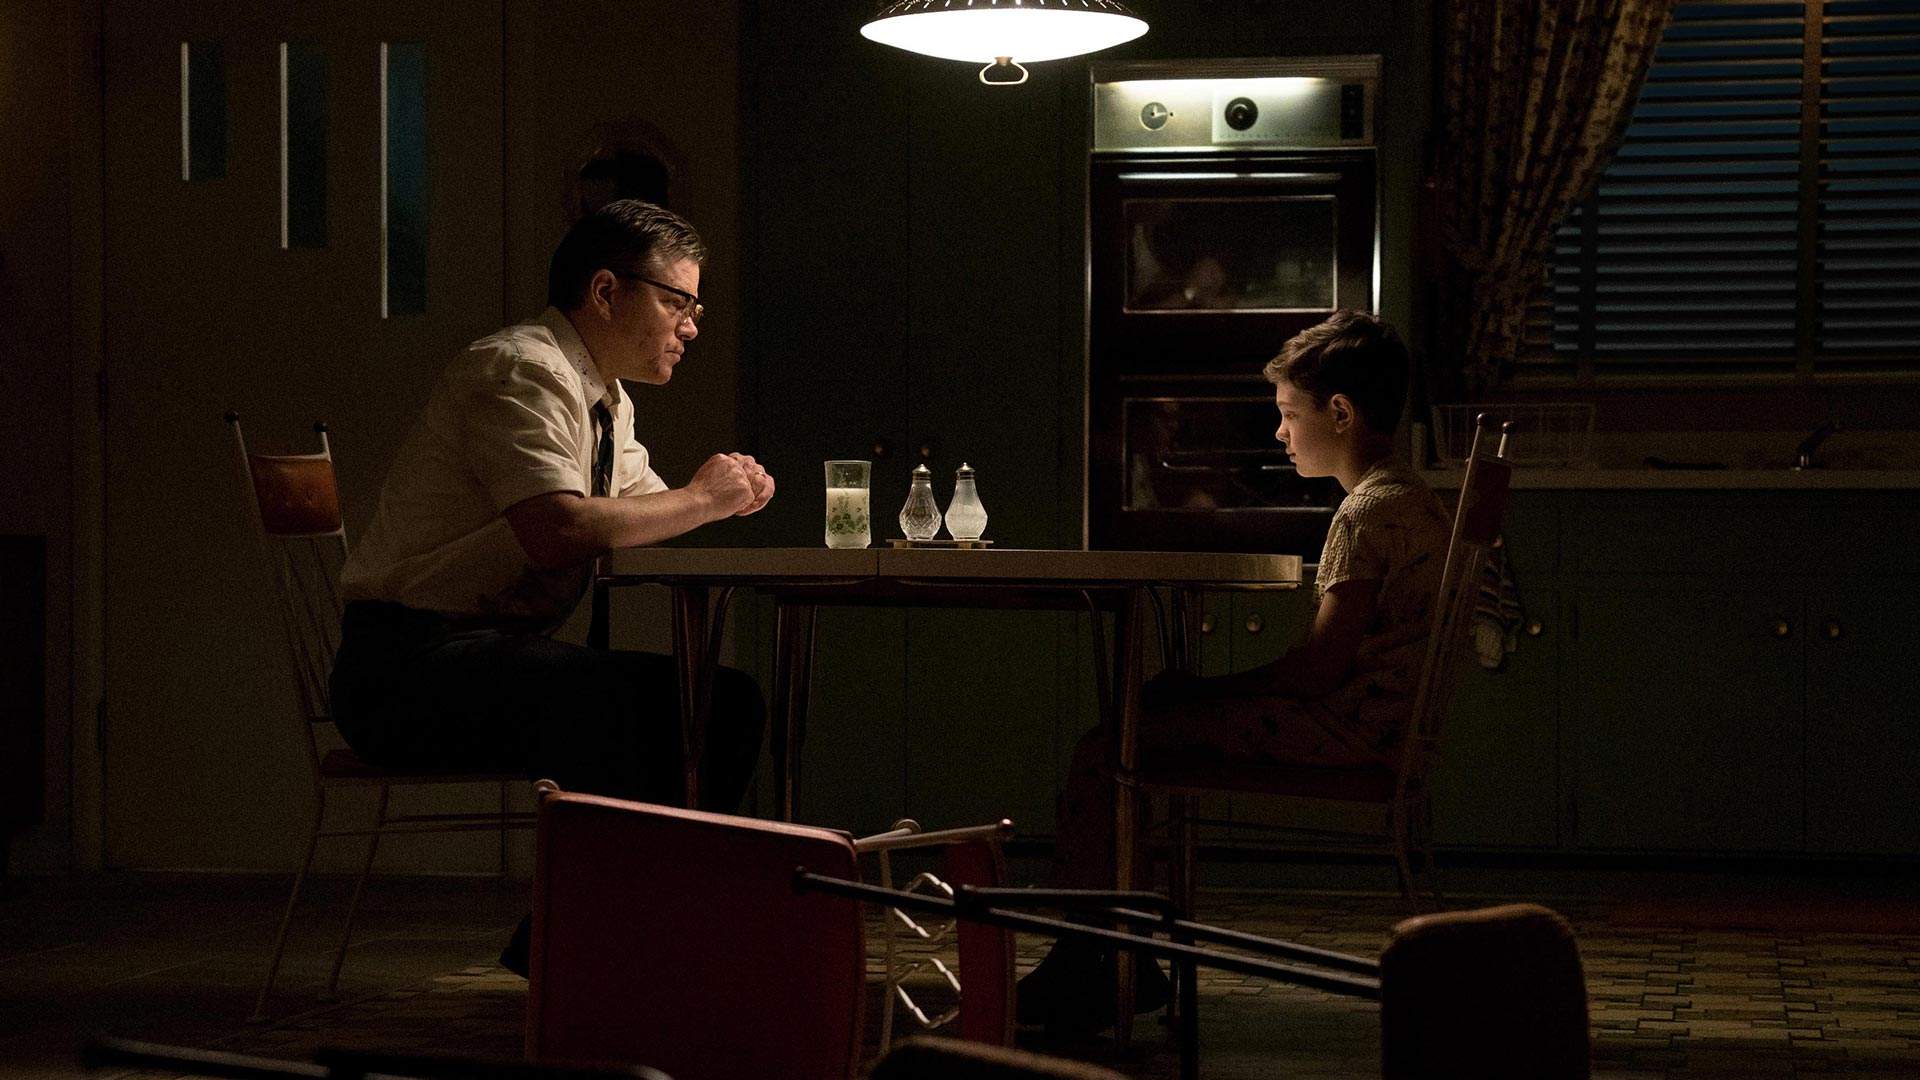 We're Giving Away Double Passes to an Early Screening of Suburbicon